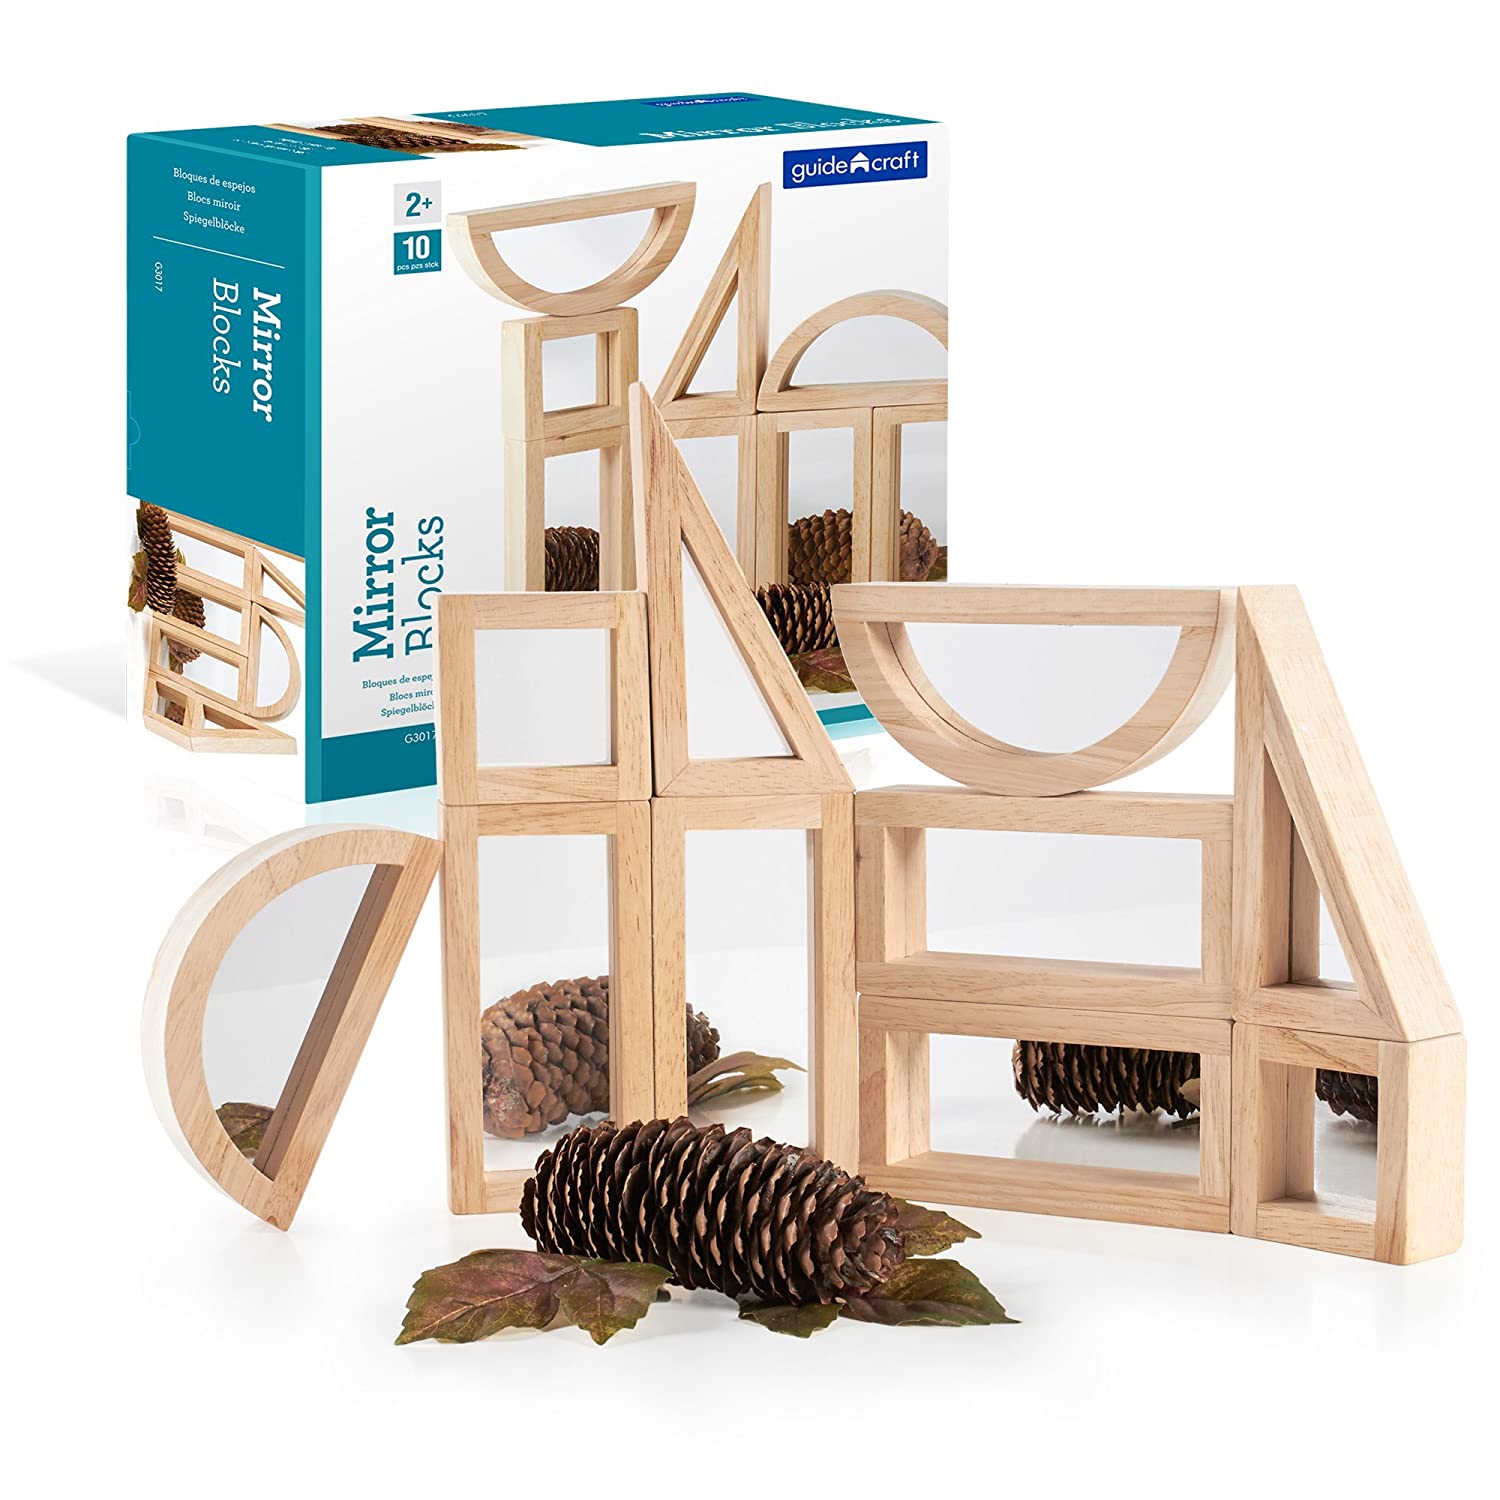 7 Best Baby Blocks 2022 - Buying Guide & Reviews 3